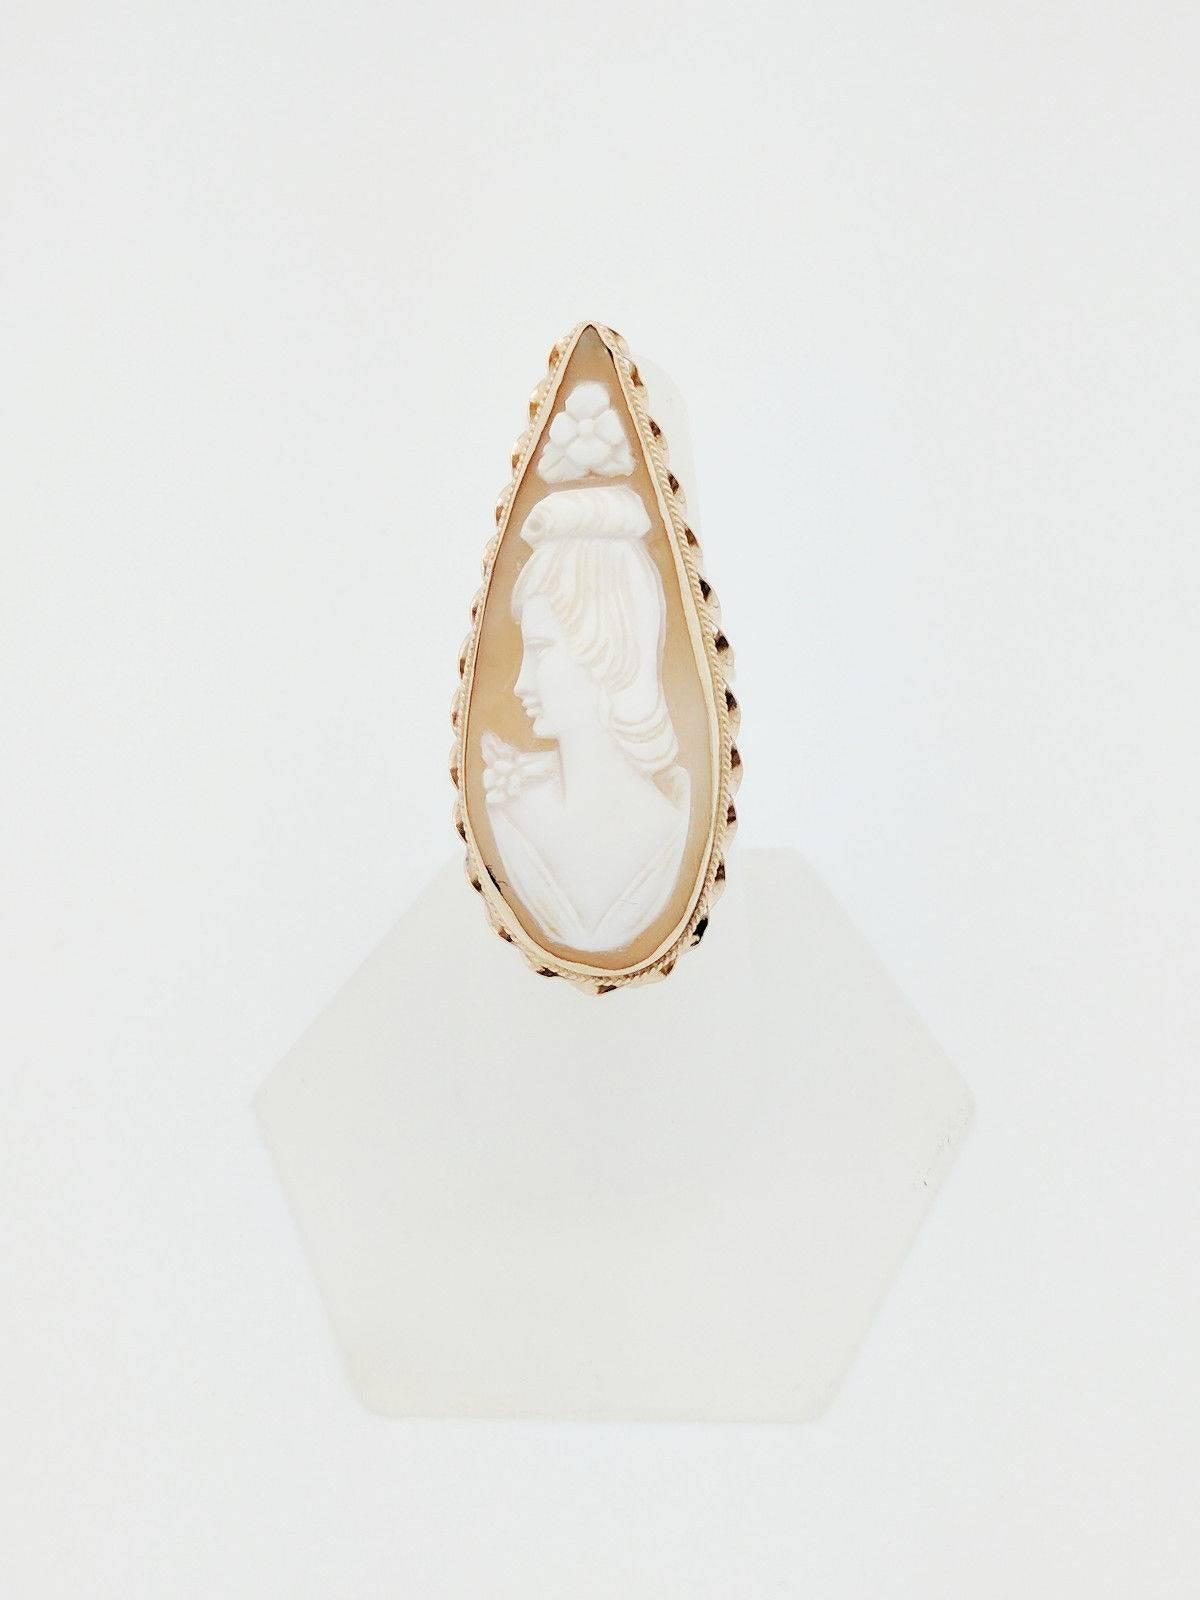 You are viewing a beautiful vintage ladies cameo ring. Any woman would love to add this piece to their collection!

This ring is crafted from 14k yellow gold and weighs 9.2 grams.  It features one pear shaped hand carved cameo. The cameo measures